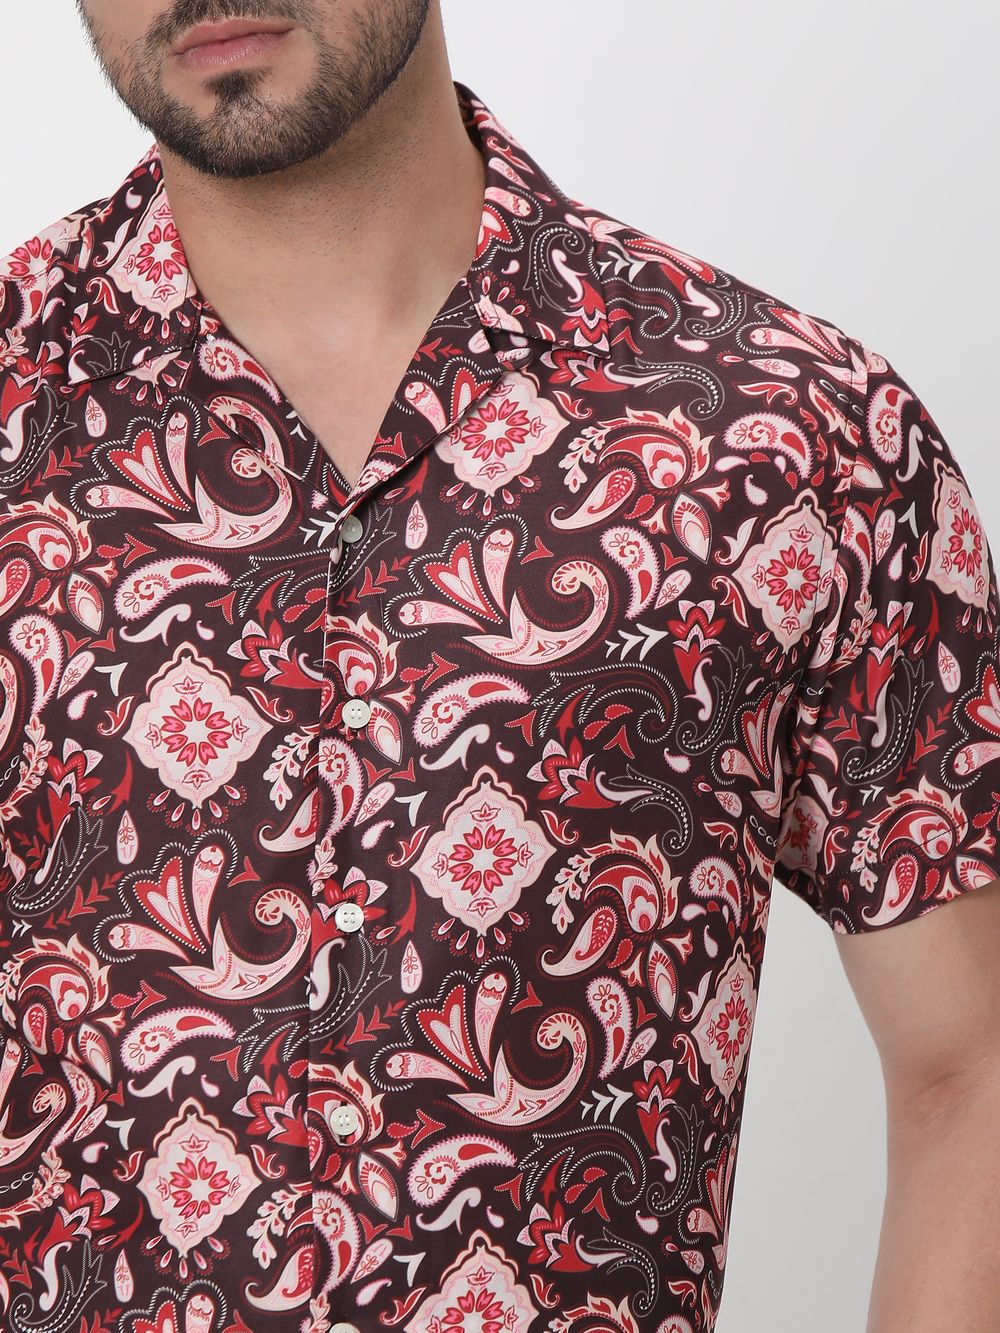 Maroon Digital Print Relaxed Fit Casual Shirt